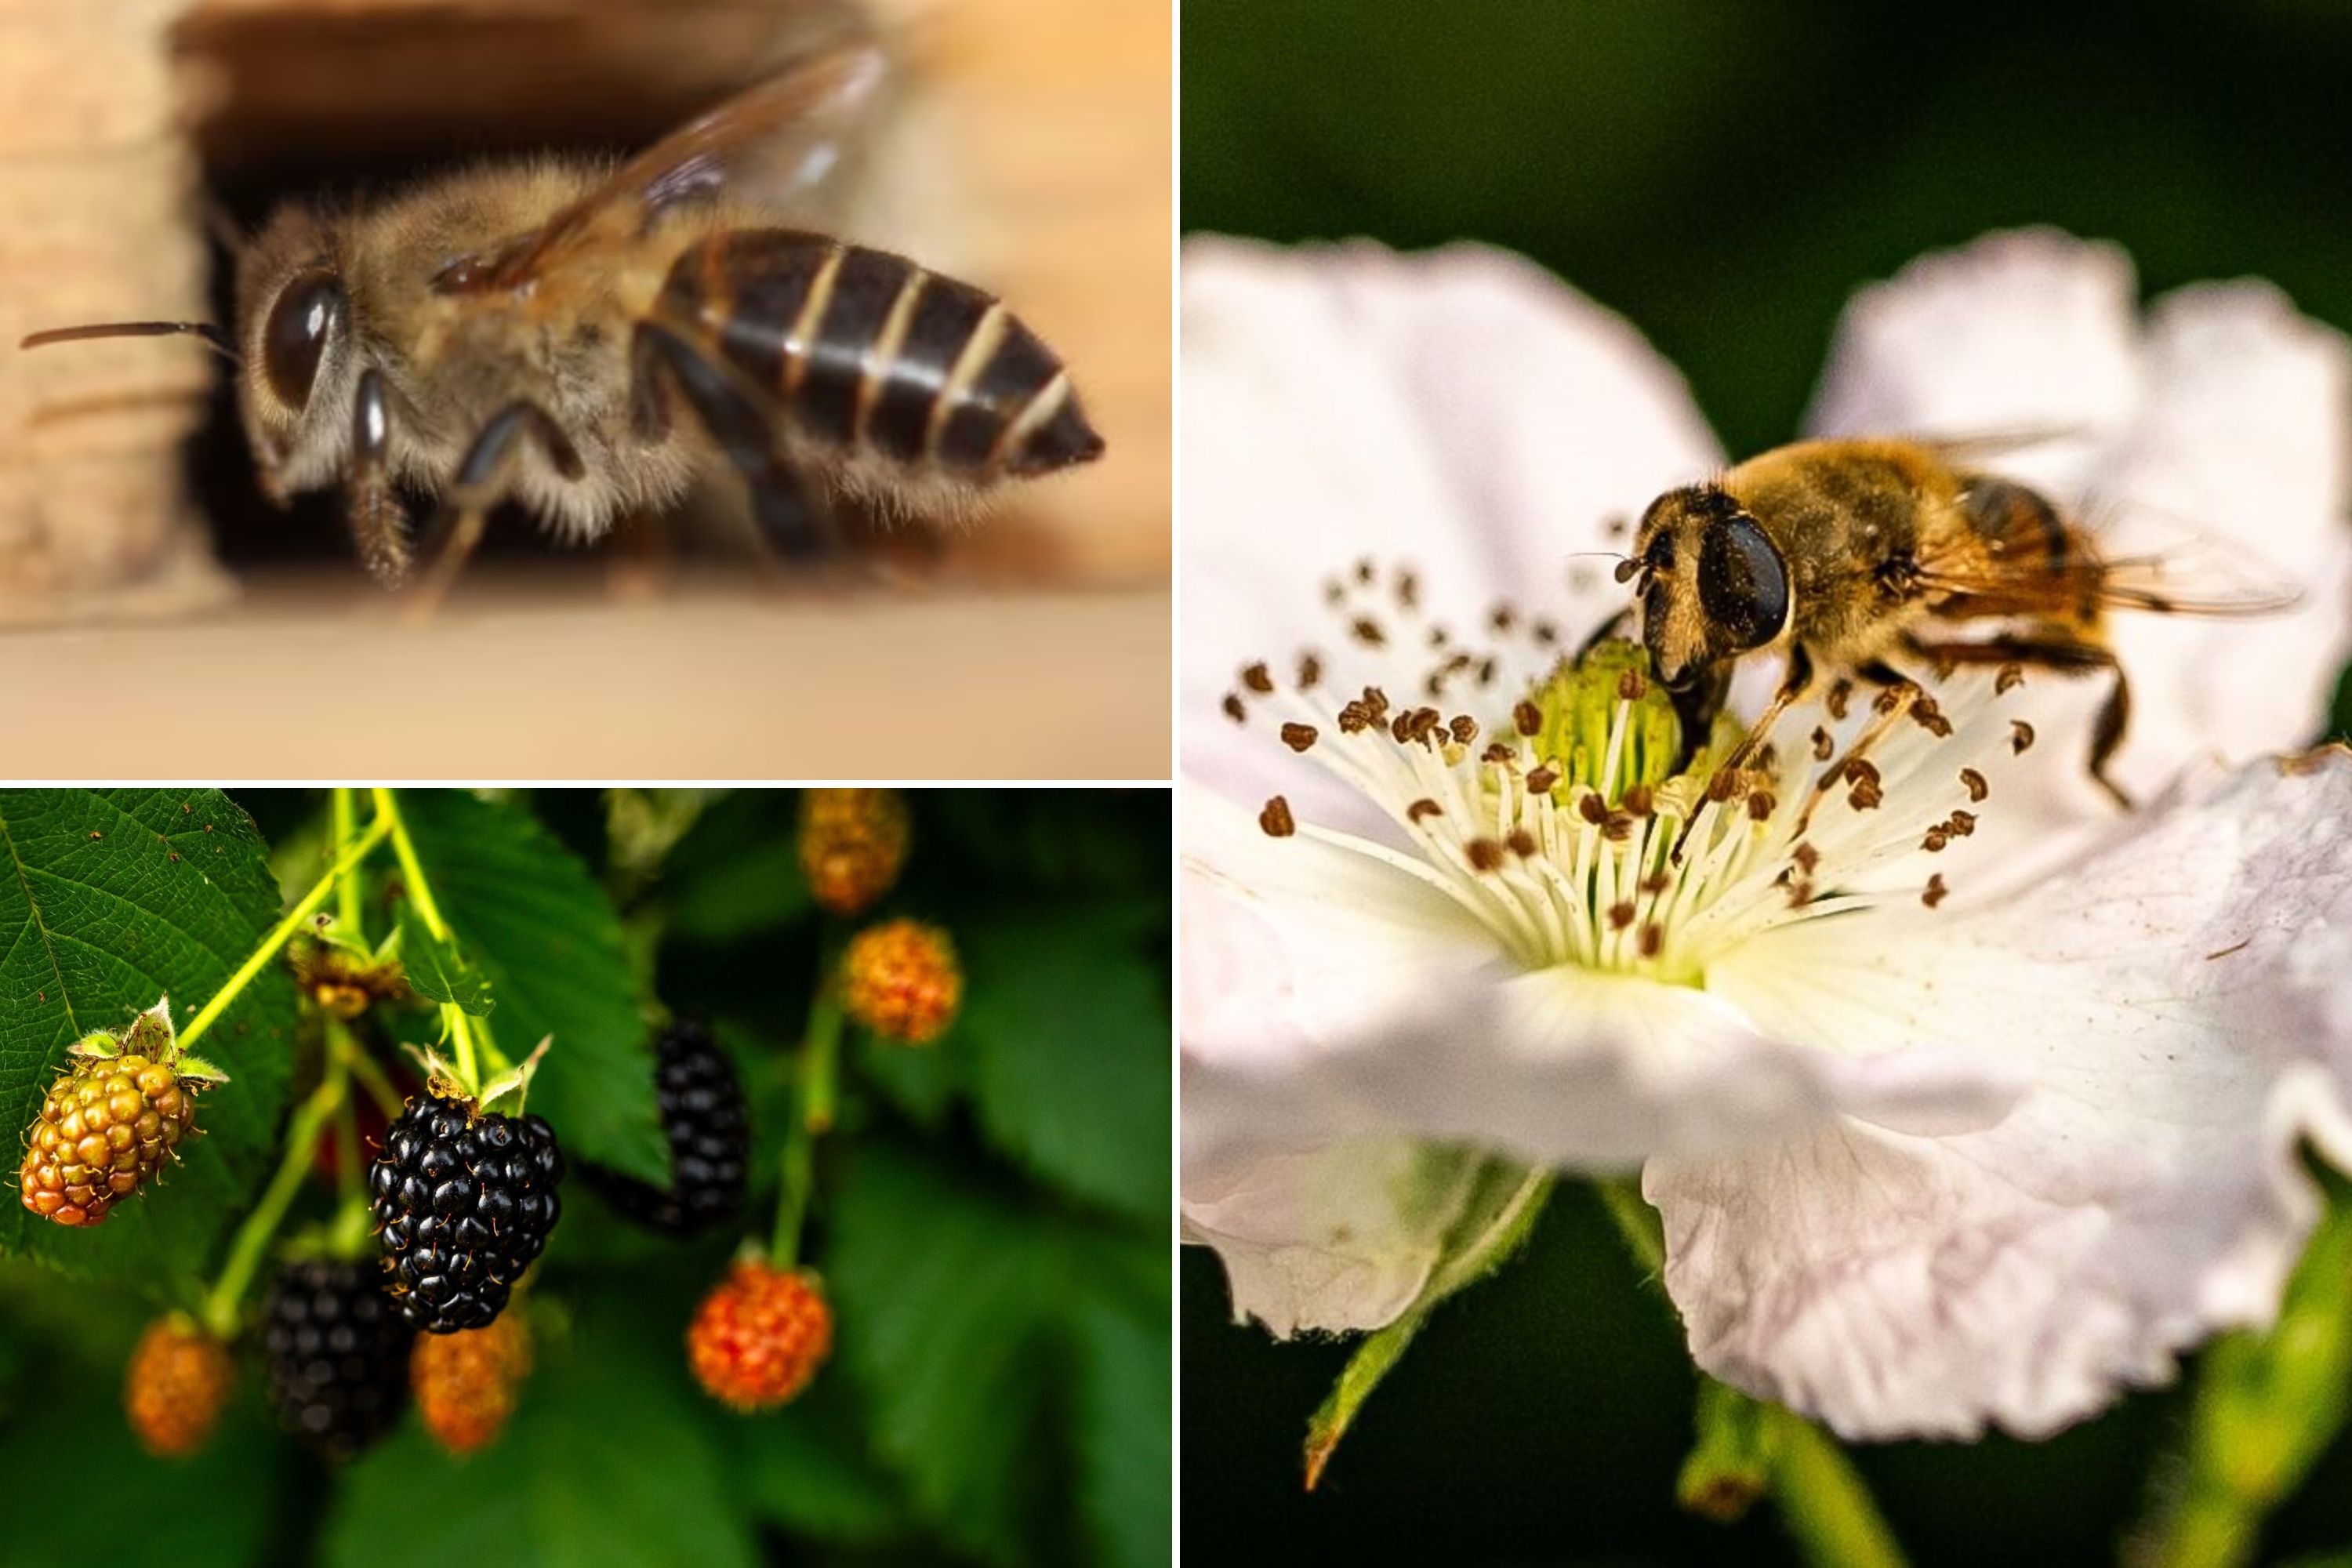 A collage of three photos showing a fly, bee and berries